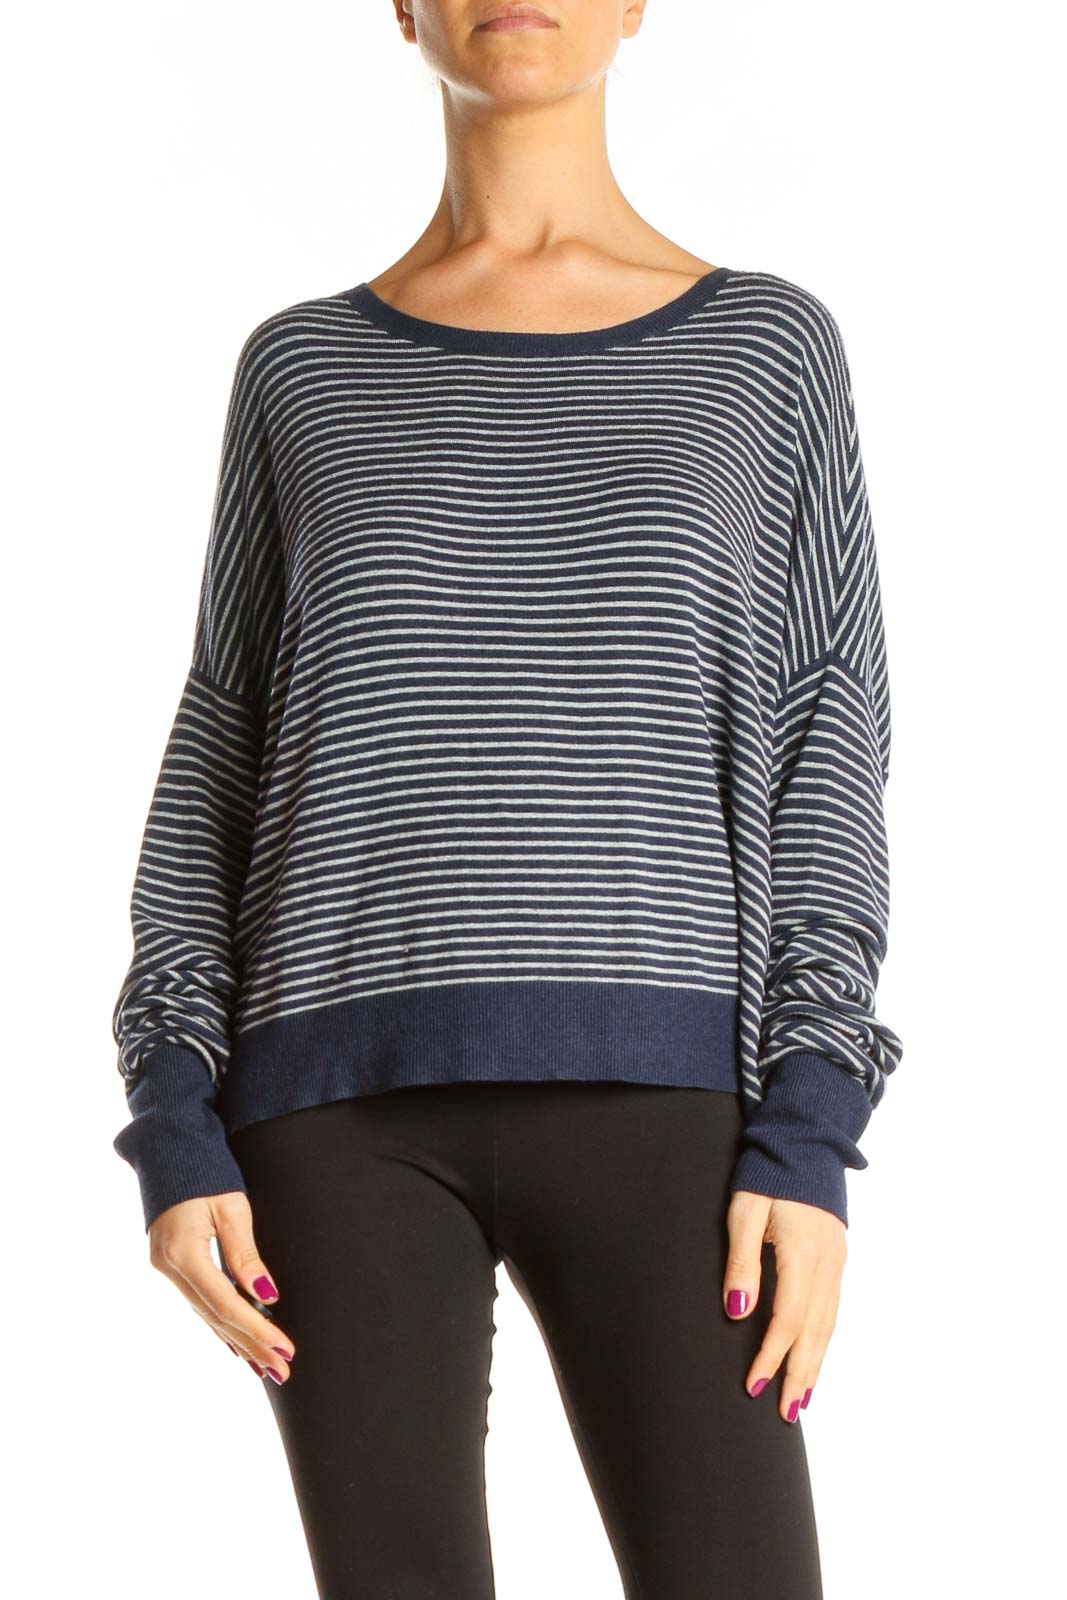 Blue Striped All Day Wear Top Front